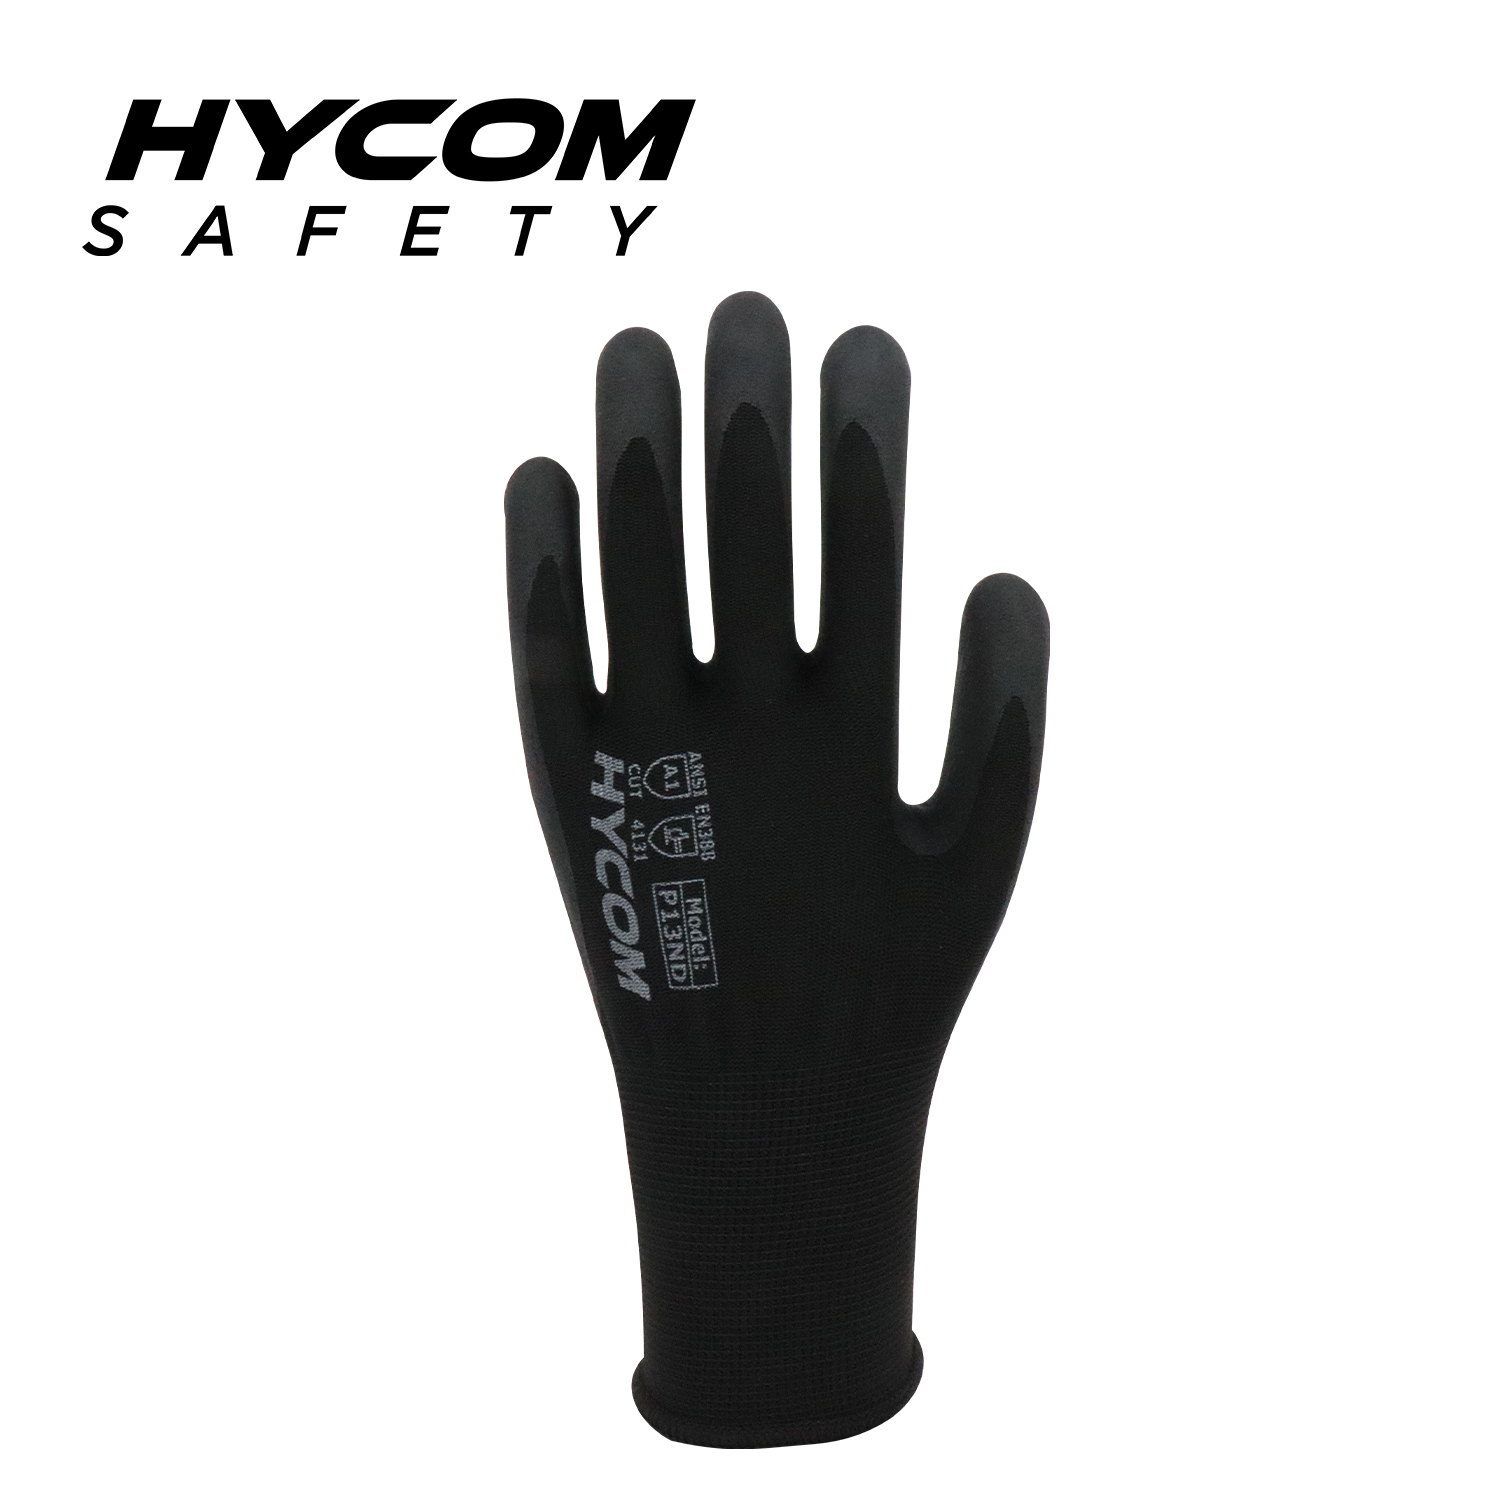 HYCOM 13G Polyester Glove with Palm Sandy Nitrile Coating Plus Nitrile Dotts Work Gloves